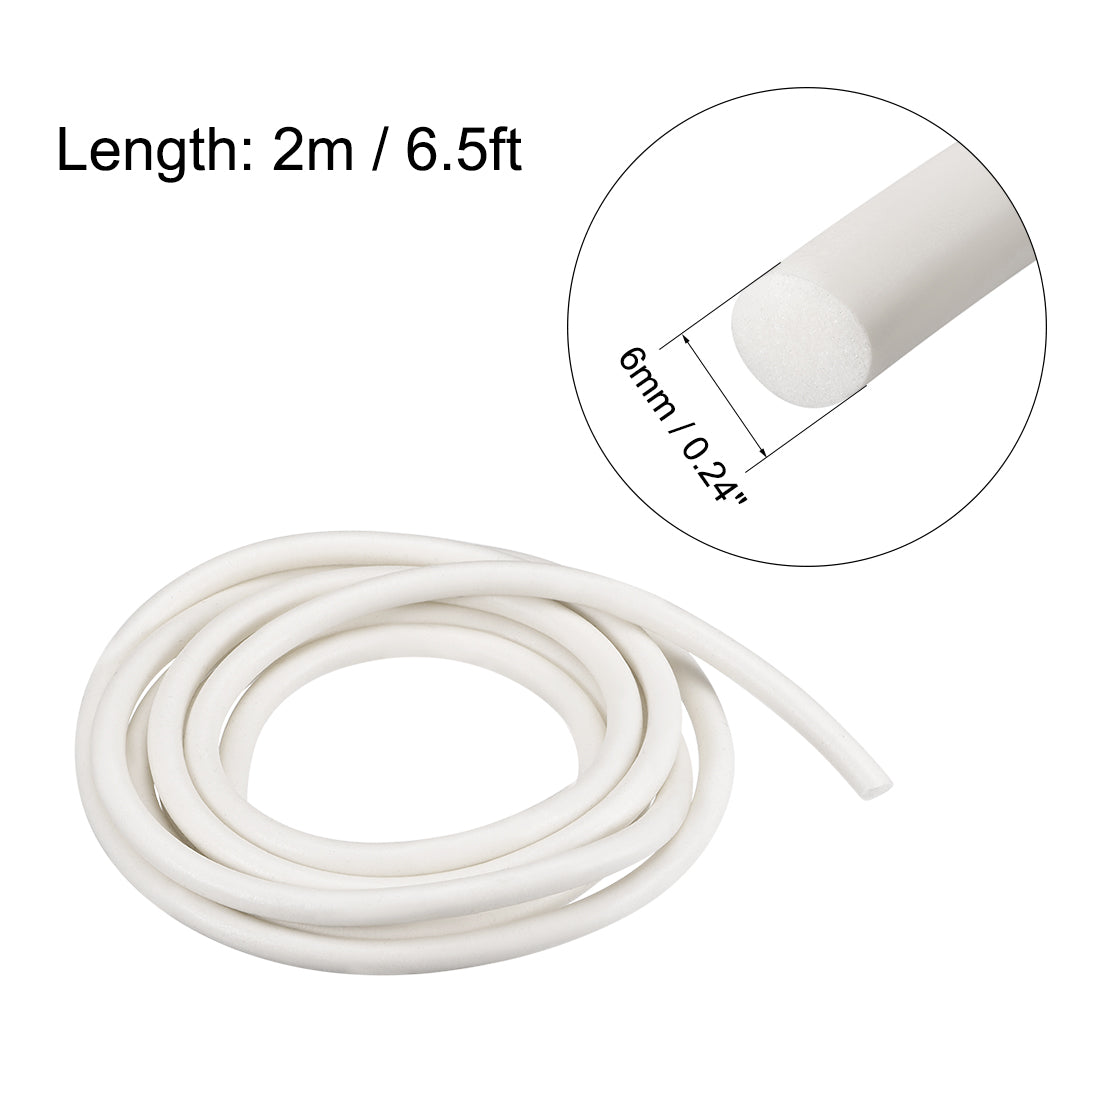 uxcell Uxcell Silicone Foam Seal Strip 6mm 2m 6.5ft Sponge Rubber Cord Solid White